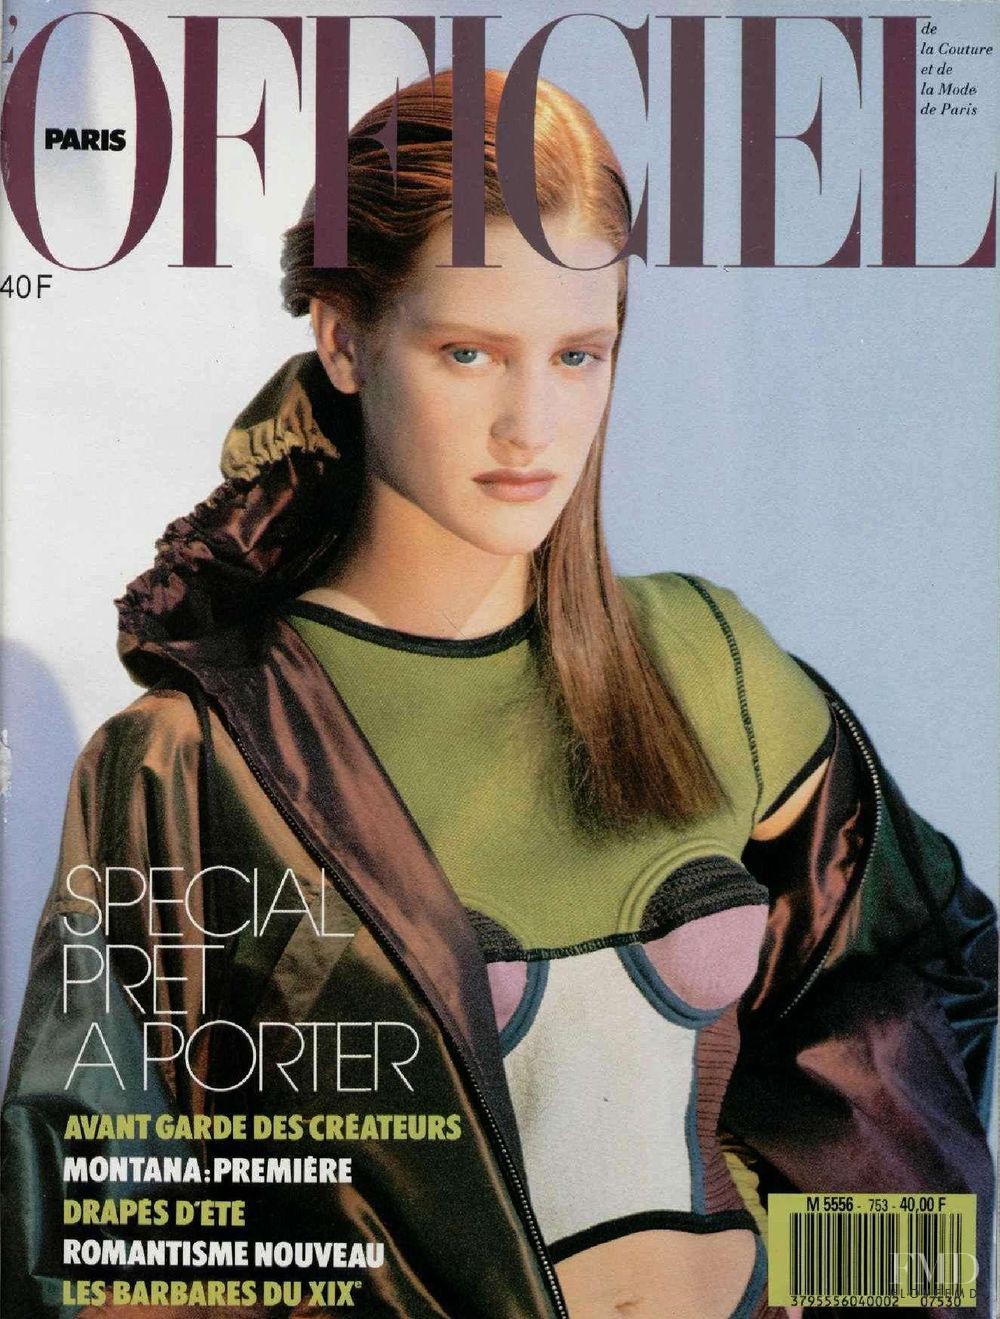 Cover of L'Officiel France , February 1990 (ID:1891)| Magazines | The FMD